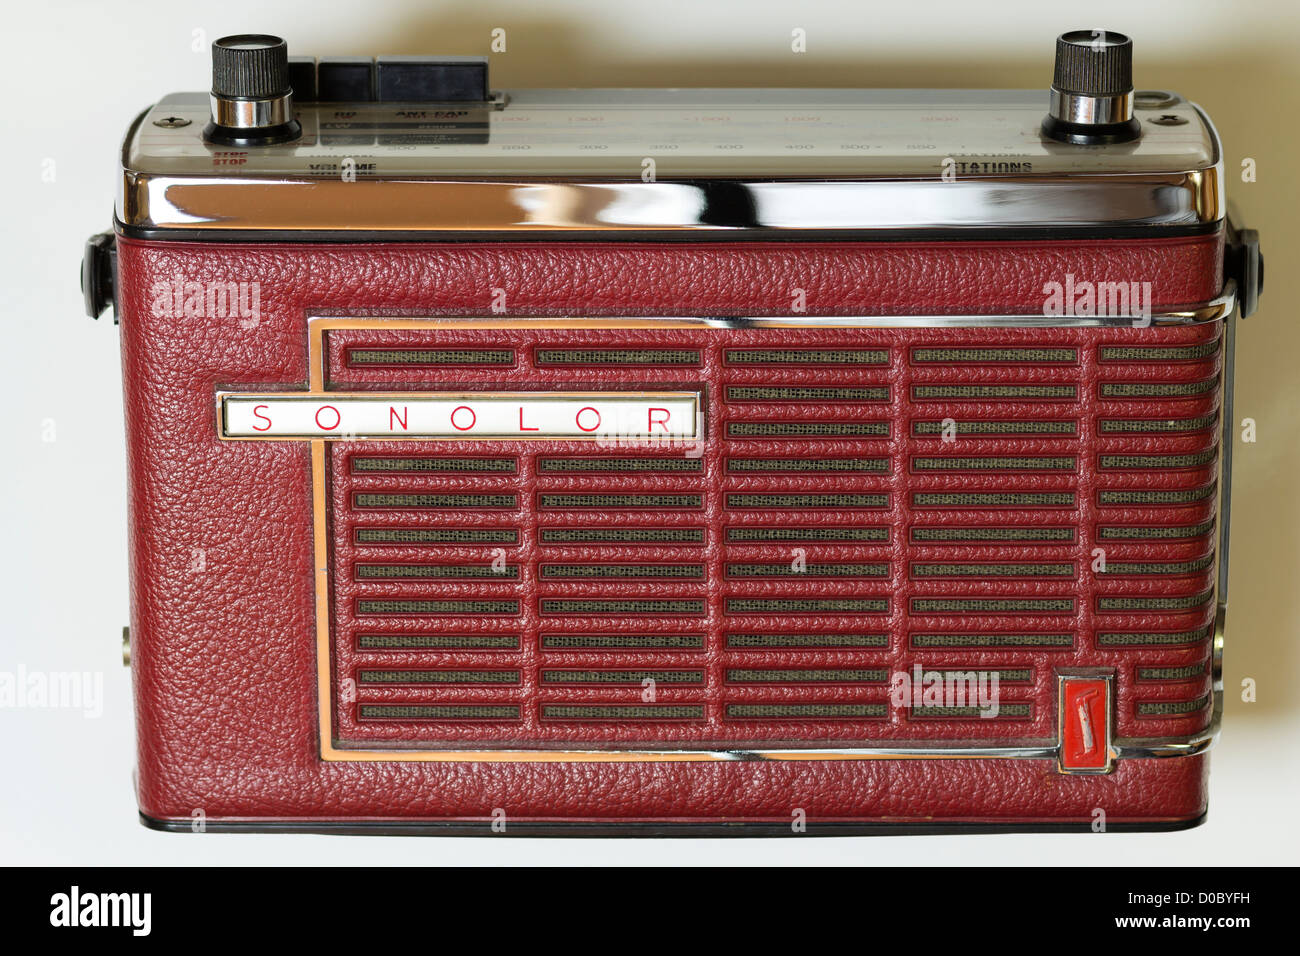 French vintage red portable radio Sonolor Stock Photo - Alamy